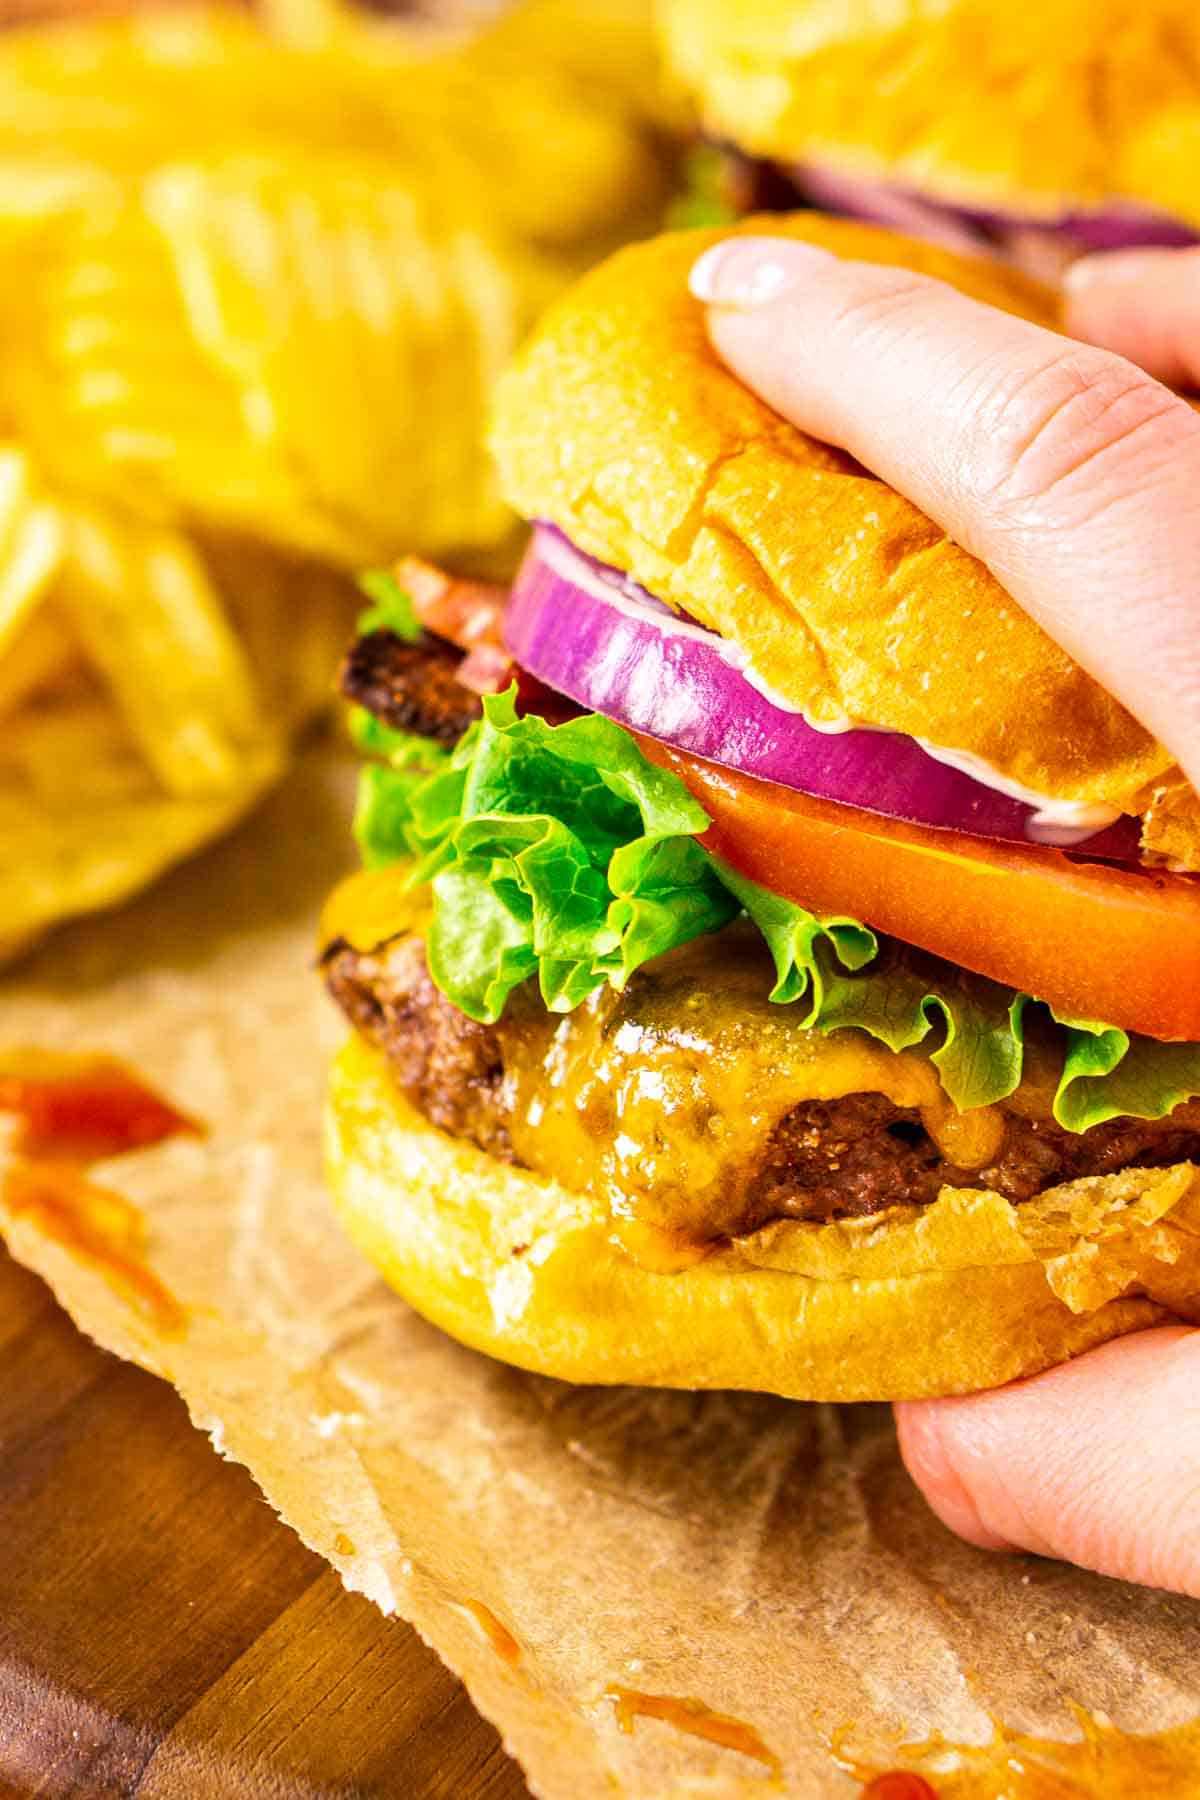 A close-up of a hand grabbing a venison burger on parchment paper and a wooden serving tray.